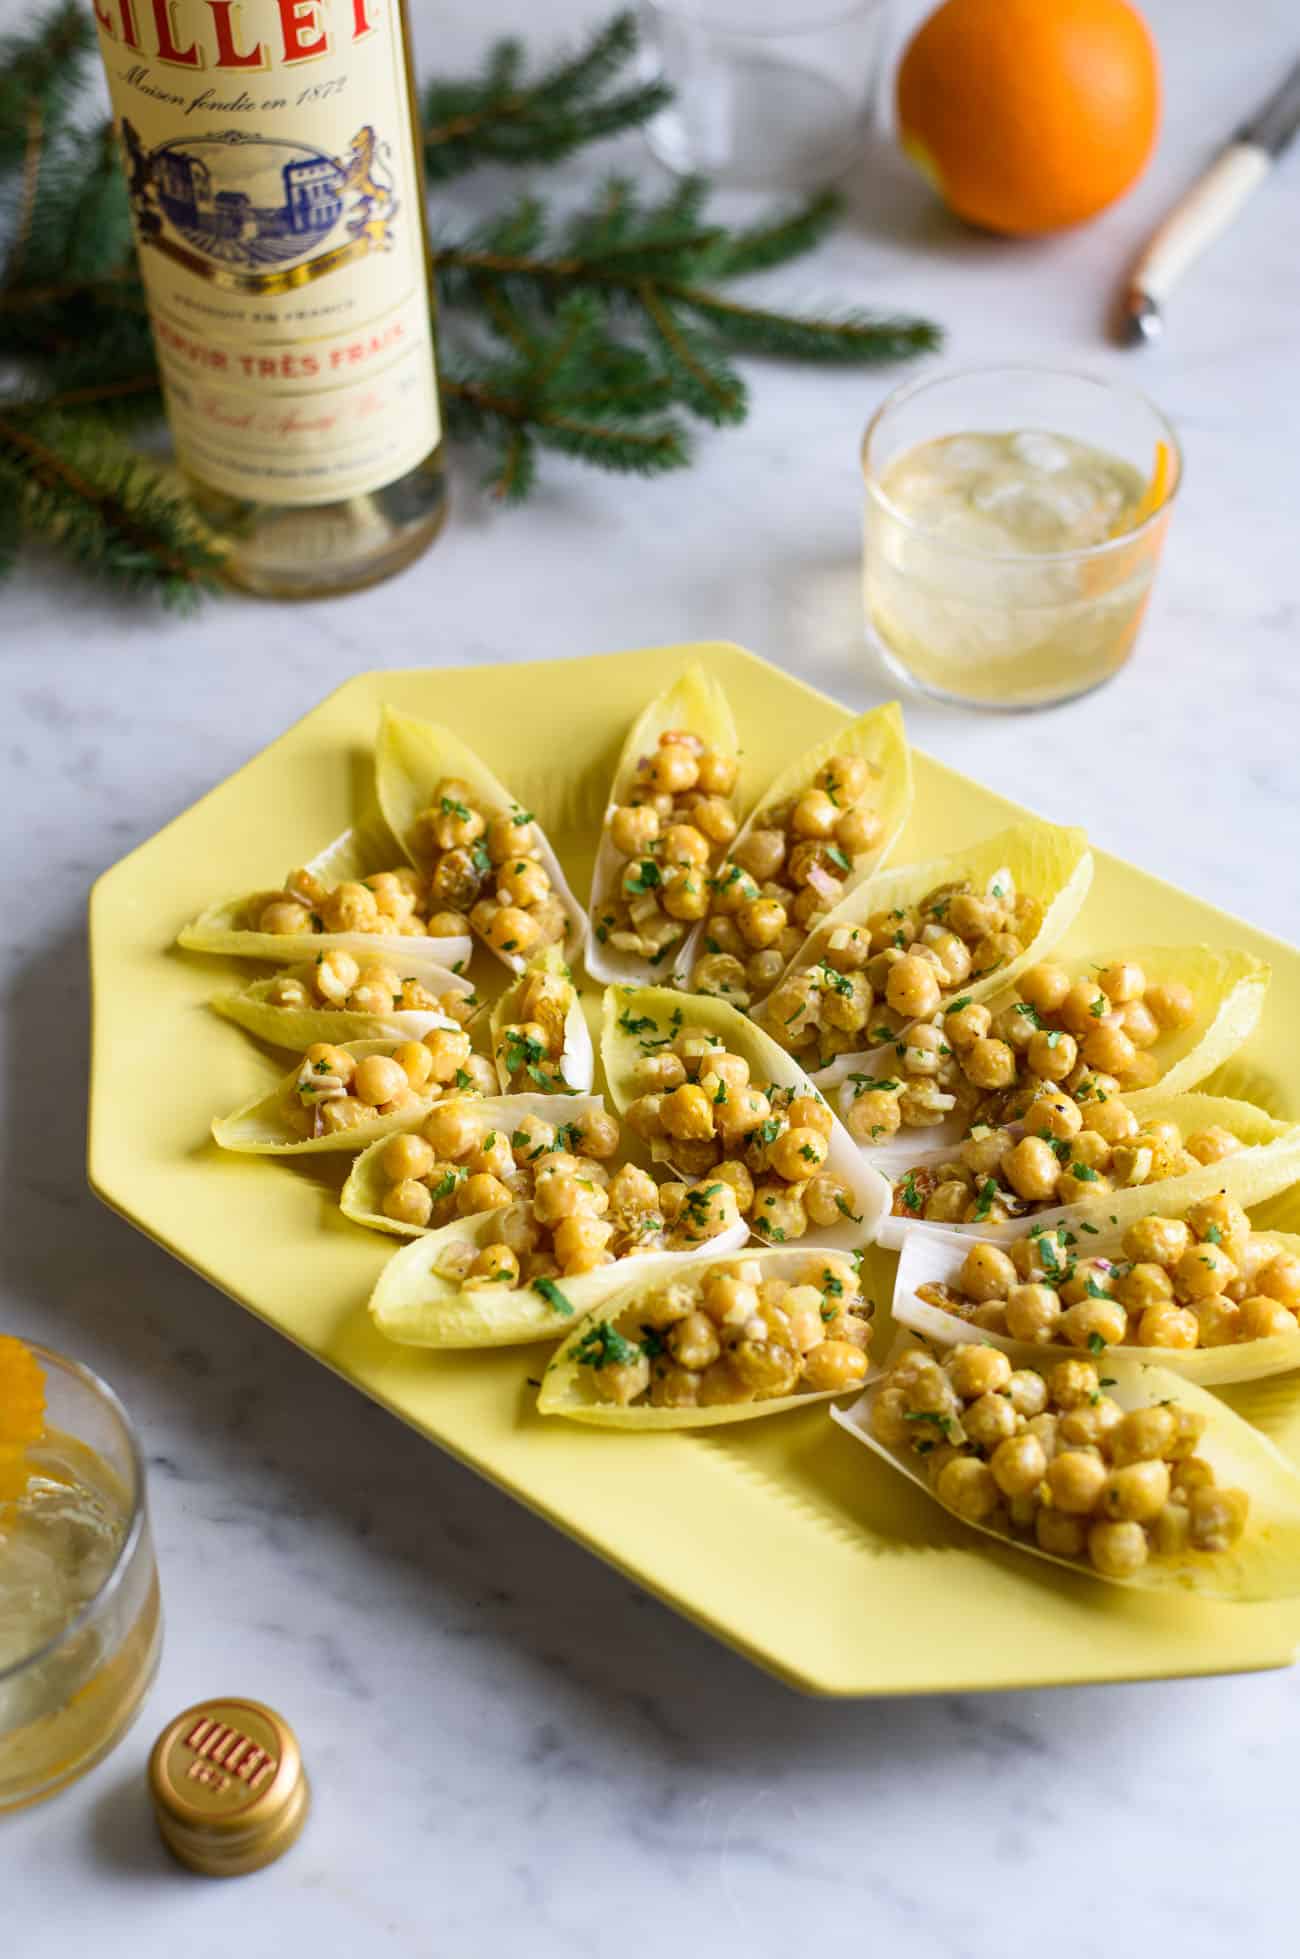 Curried Chickpea Salad in Endive Spears on an antique yellow platter